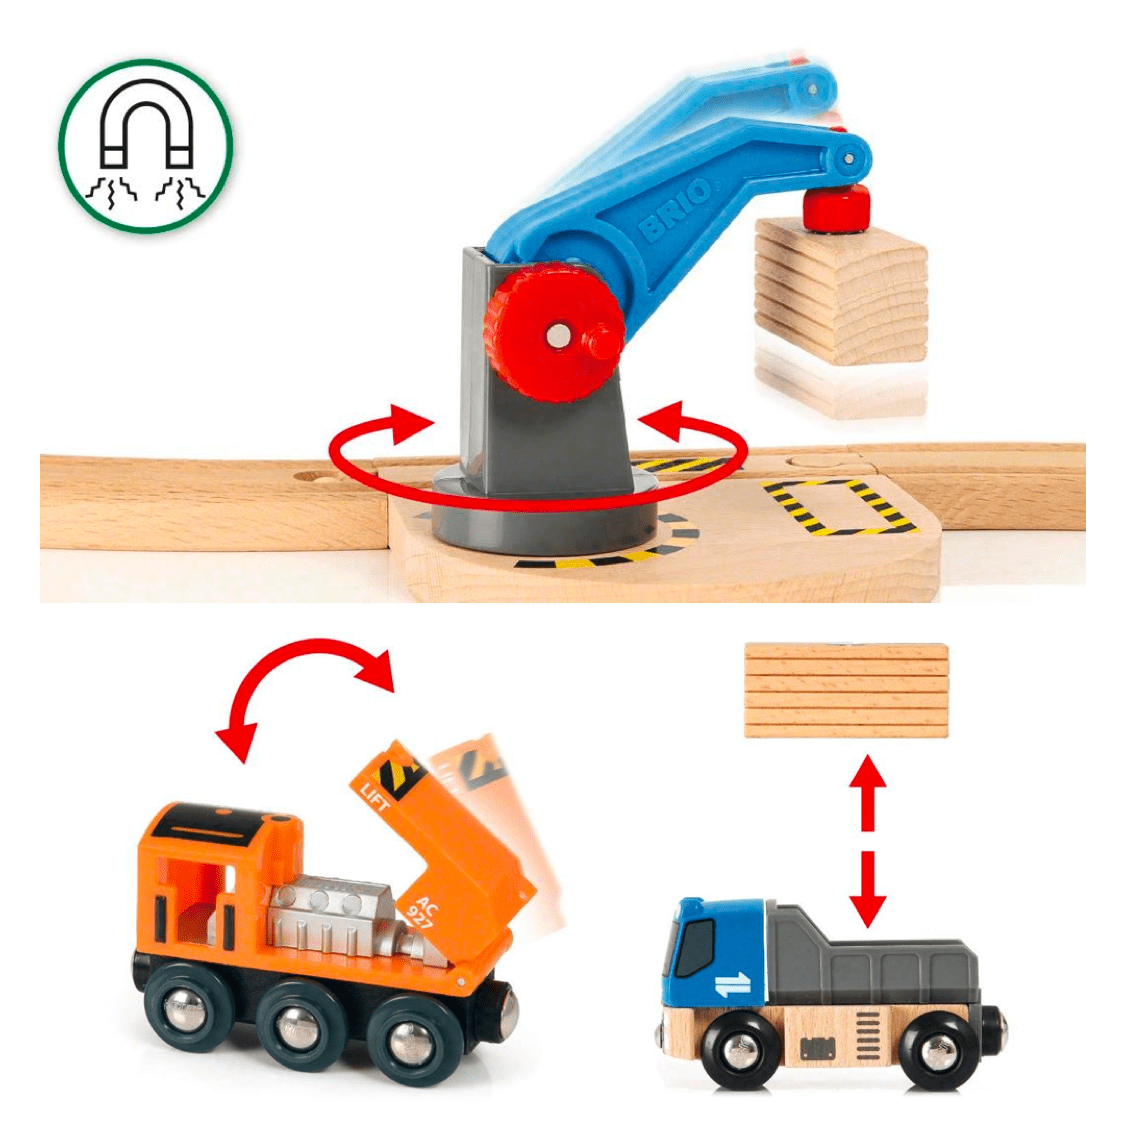 brio starter lift and load set